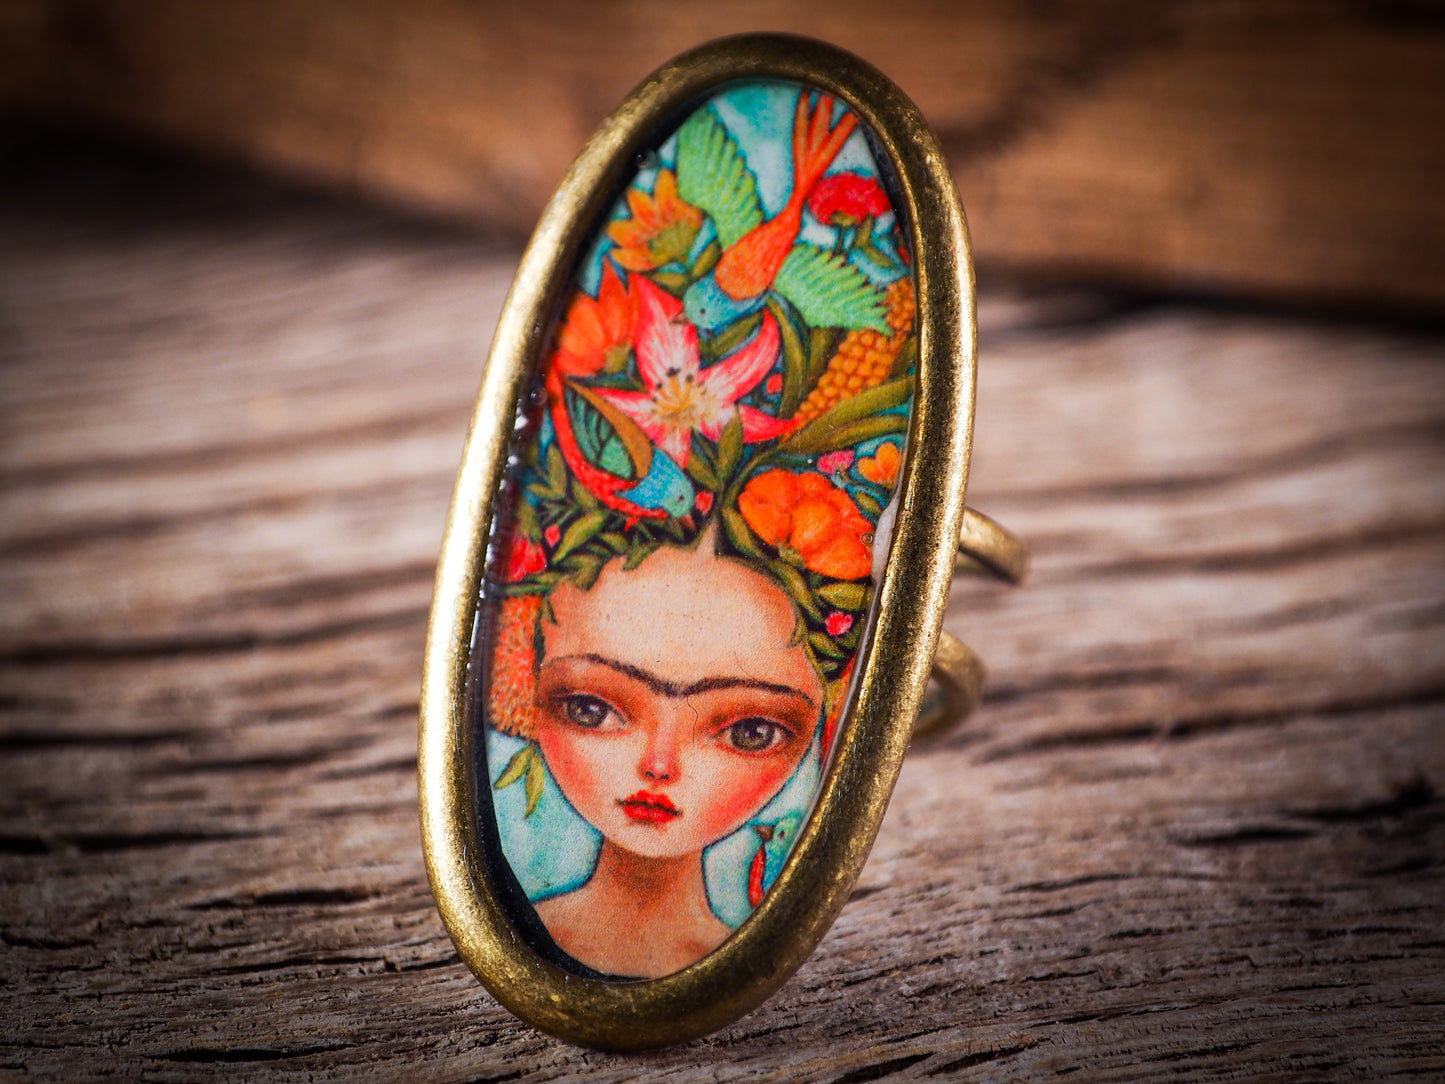 An original, one of a kind handmade jewelry by Idania Salcido, the artist behind Danita Art. Adjustable ring to different finger sizes, the oval image will create a statement of boldness and confidence that will draw looks and attention to your hands when you wear this powerful little piece with one of my favorite image.